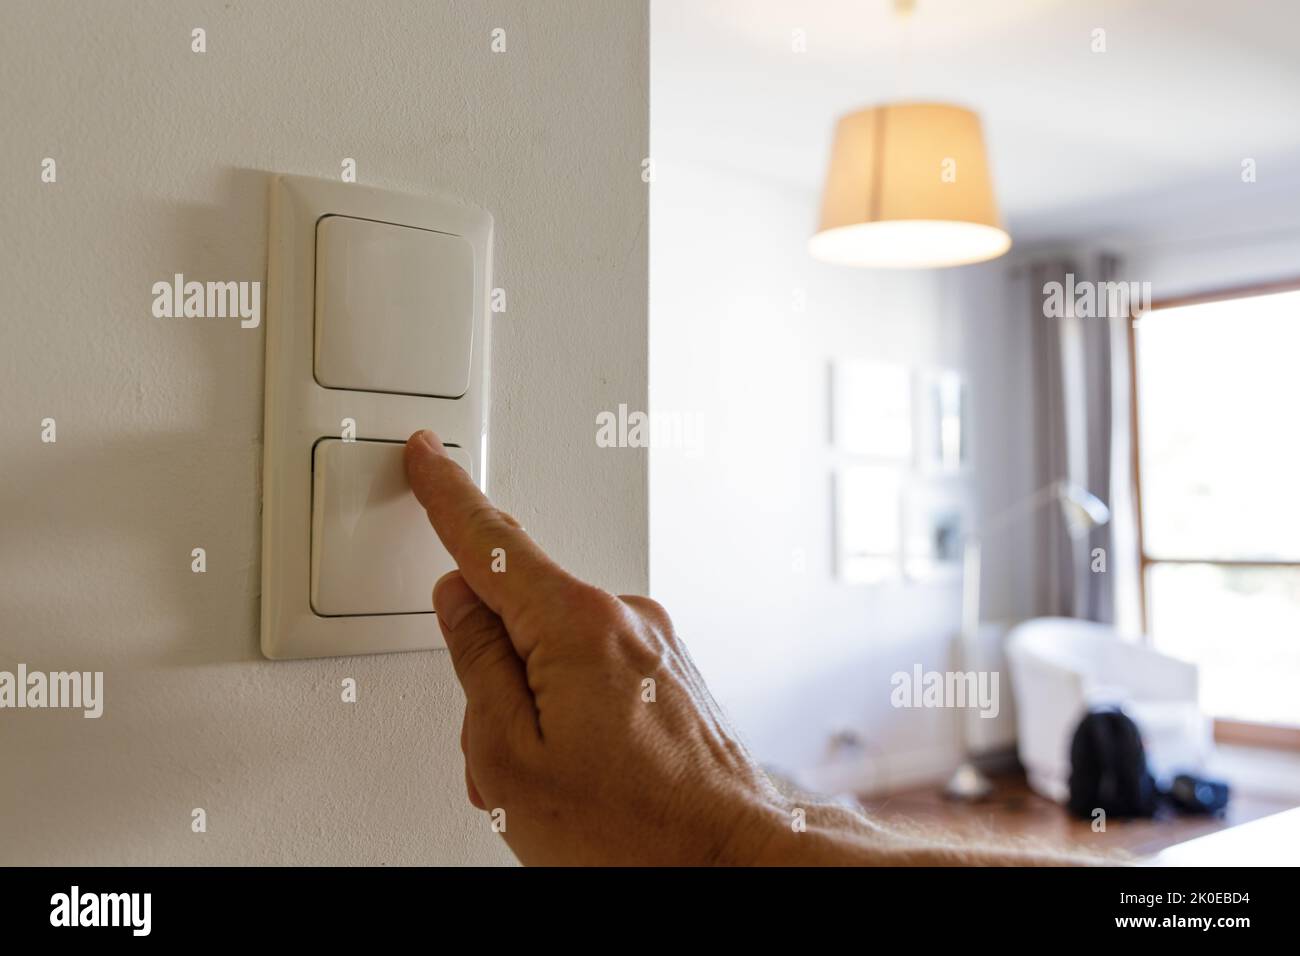 Saving energy at home, turning off the light Stock Photo